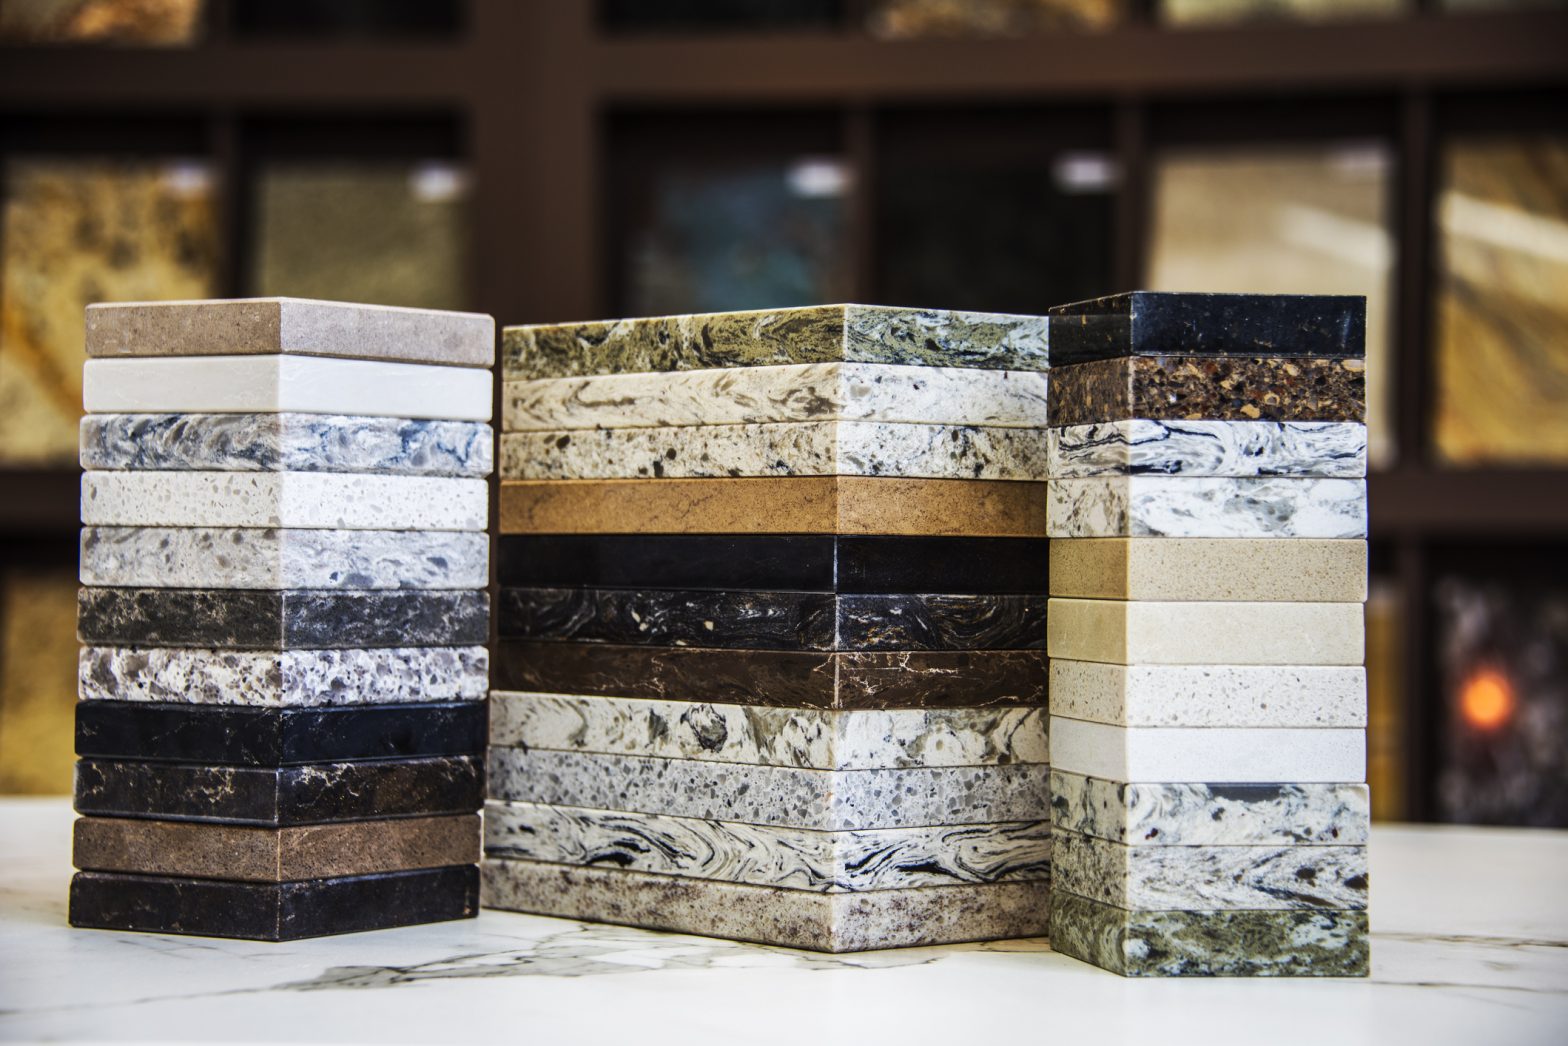 https://www.expresscabinetgranite.com/wp-content/uploads/2021/07/countertop-samples-for-a-granite-countertop-installation-in-pittsburgh1-1568x1046.jpg